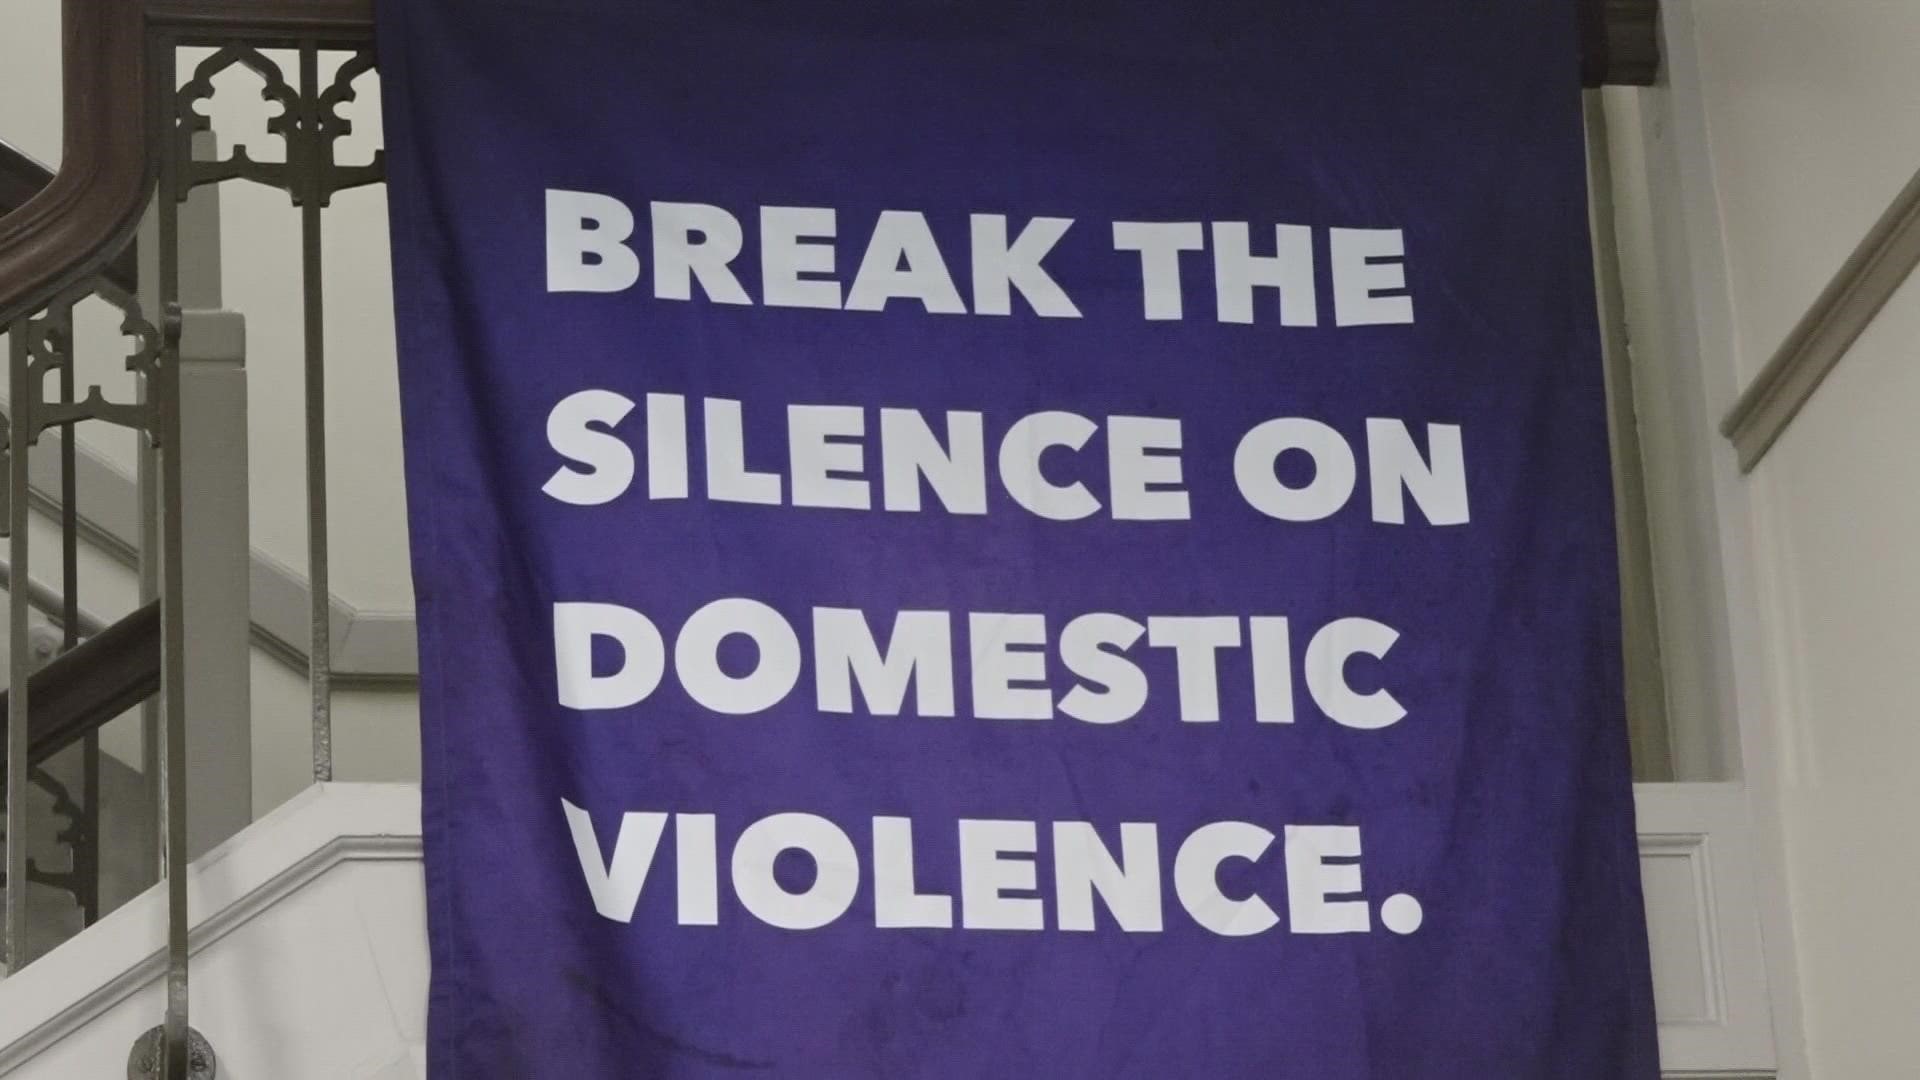 In Kent County, domestic violence calls to police are up 35% since the start of the pandemic, and domestic-violence related homicides are on track to double.